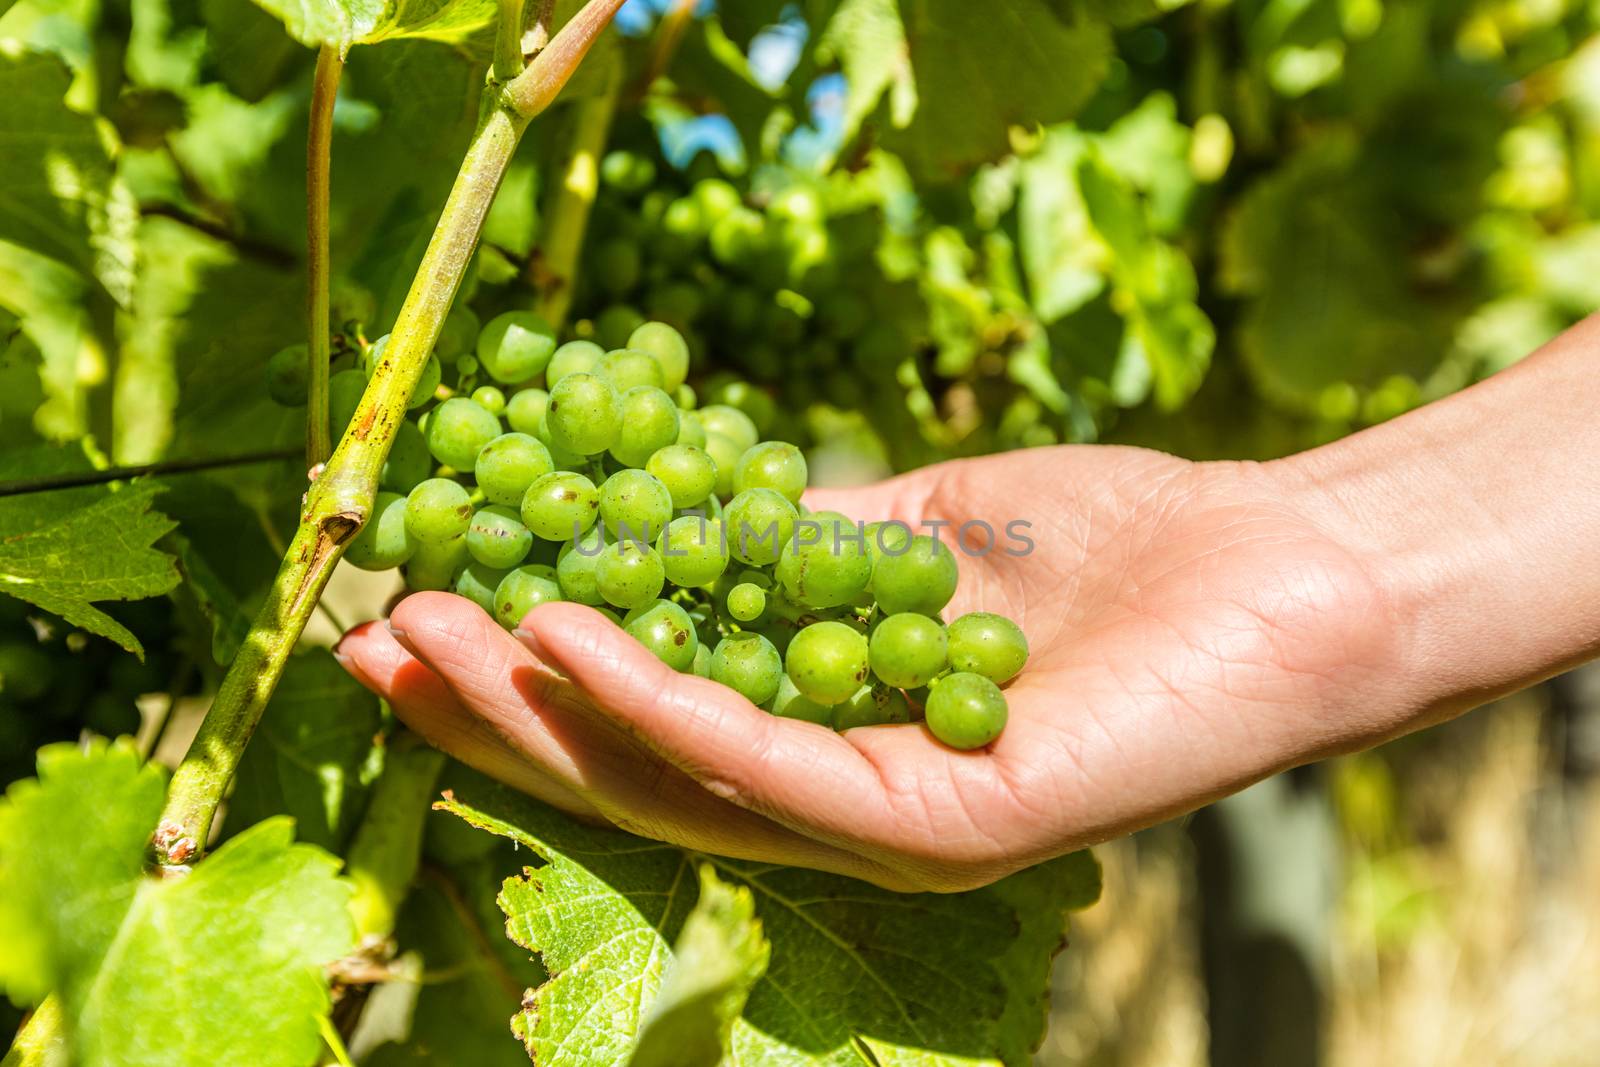 Vineyard wine grape harvest woman farming picking ripe fruits to make white wine. Closeup of hand holding bunch of green grapes on grapevine.